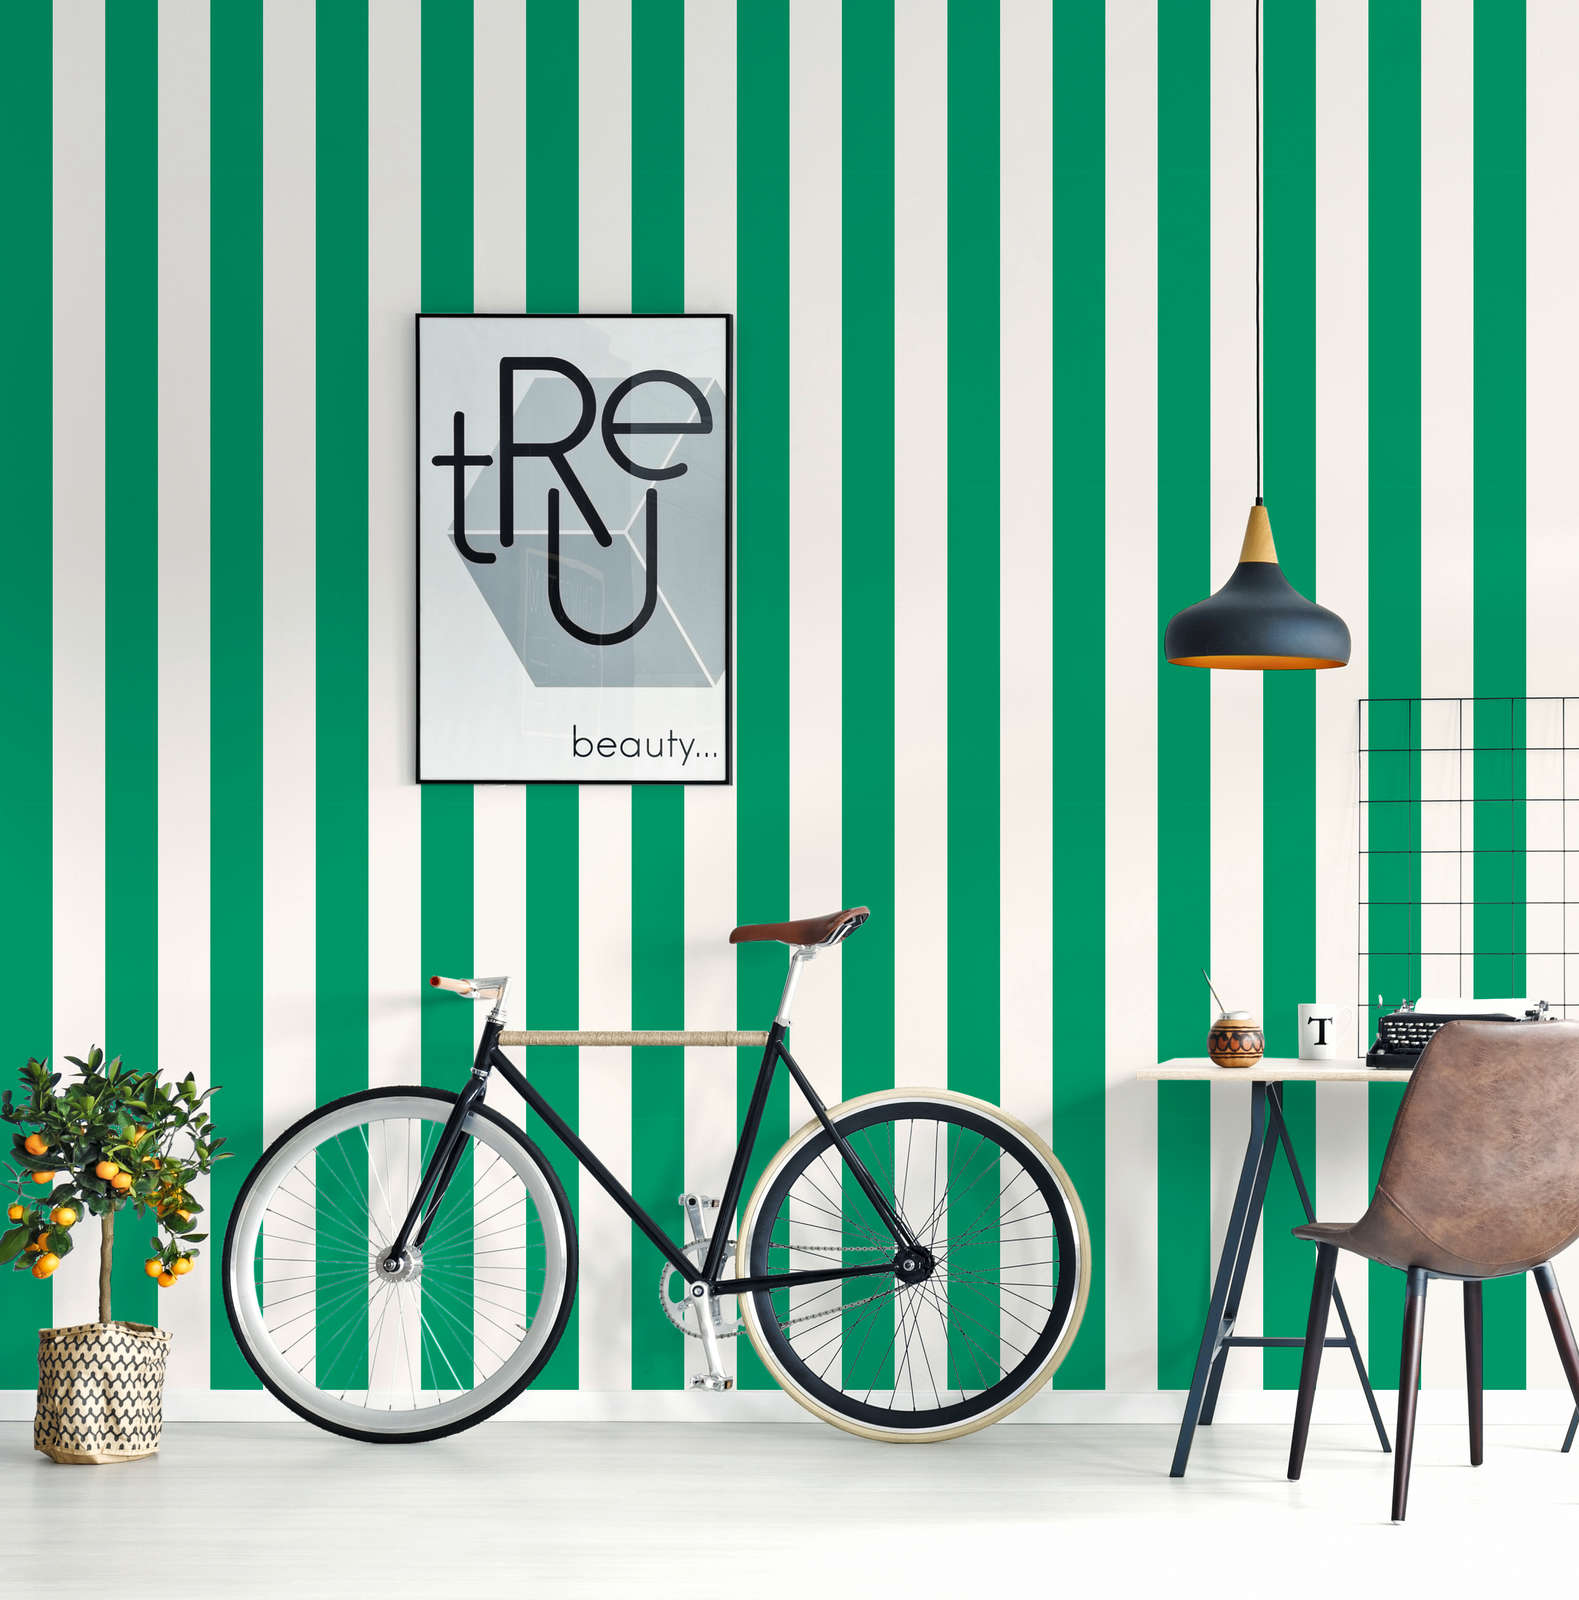             Striped wallpaper with light structure - green, white
        